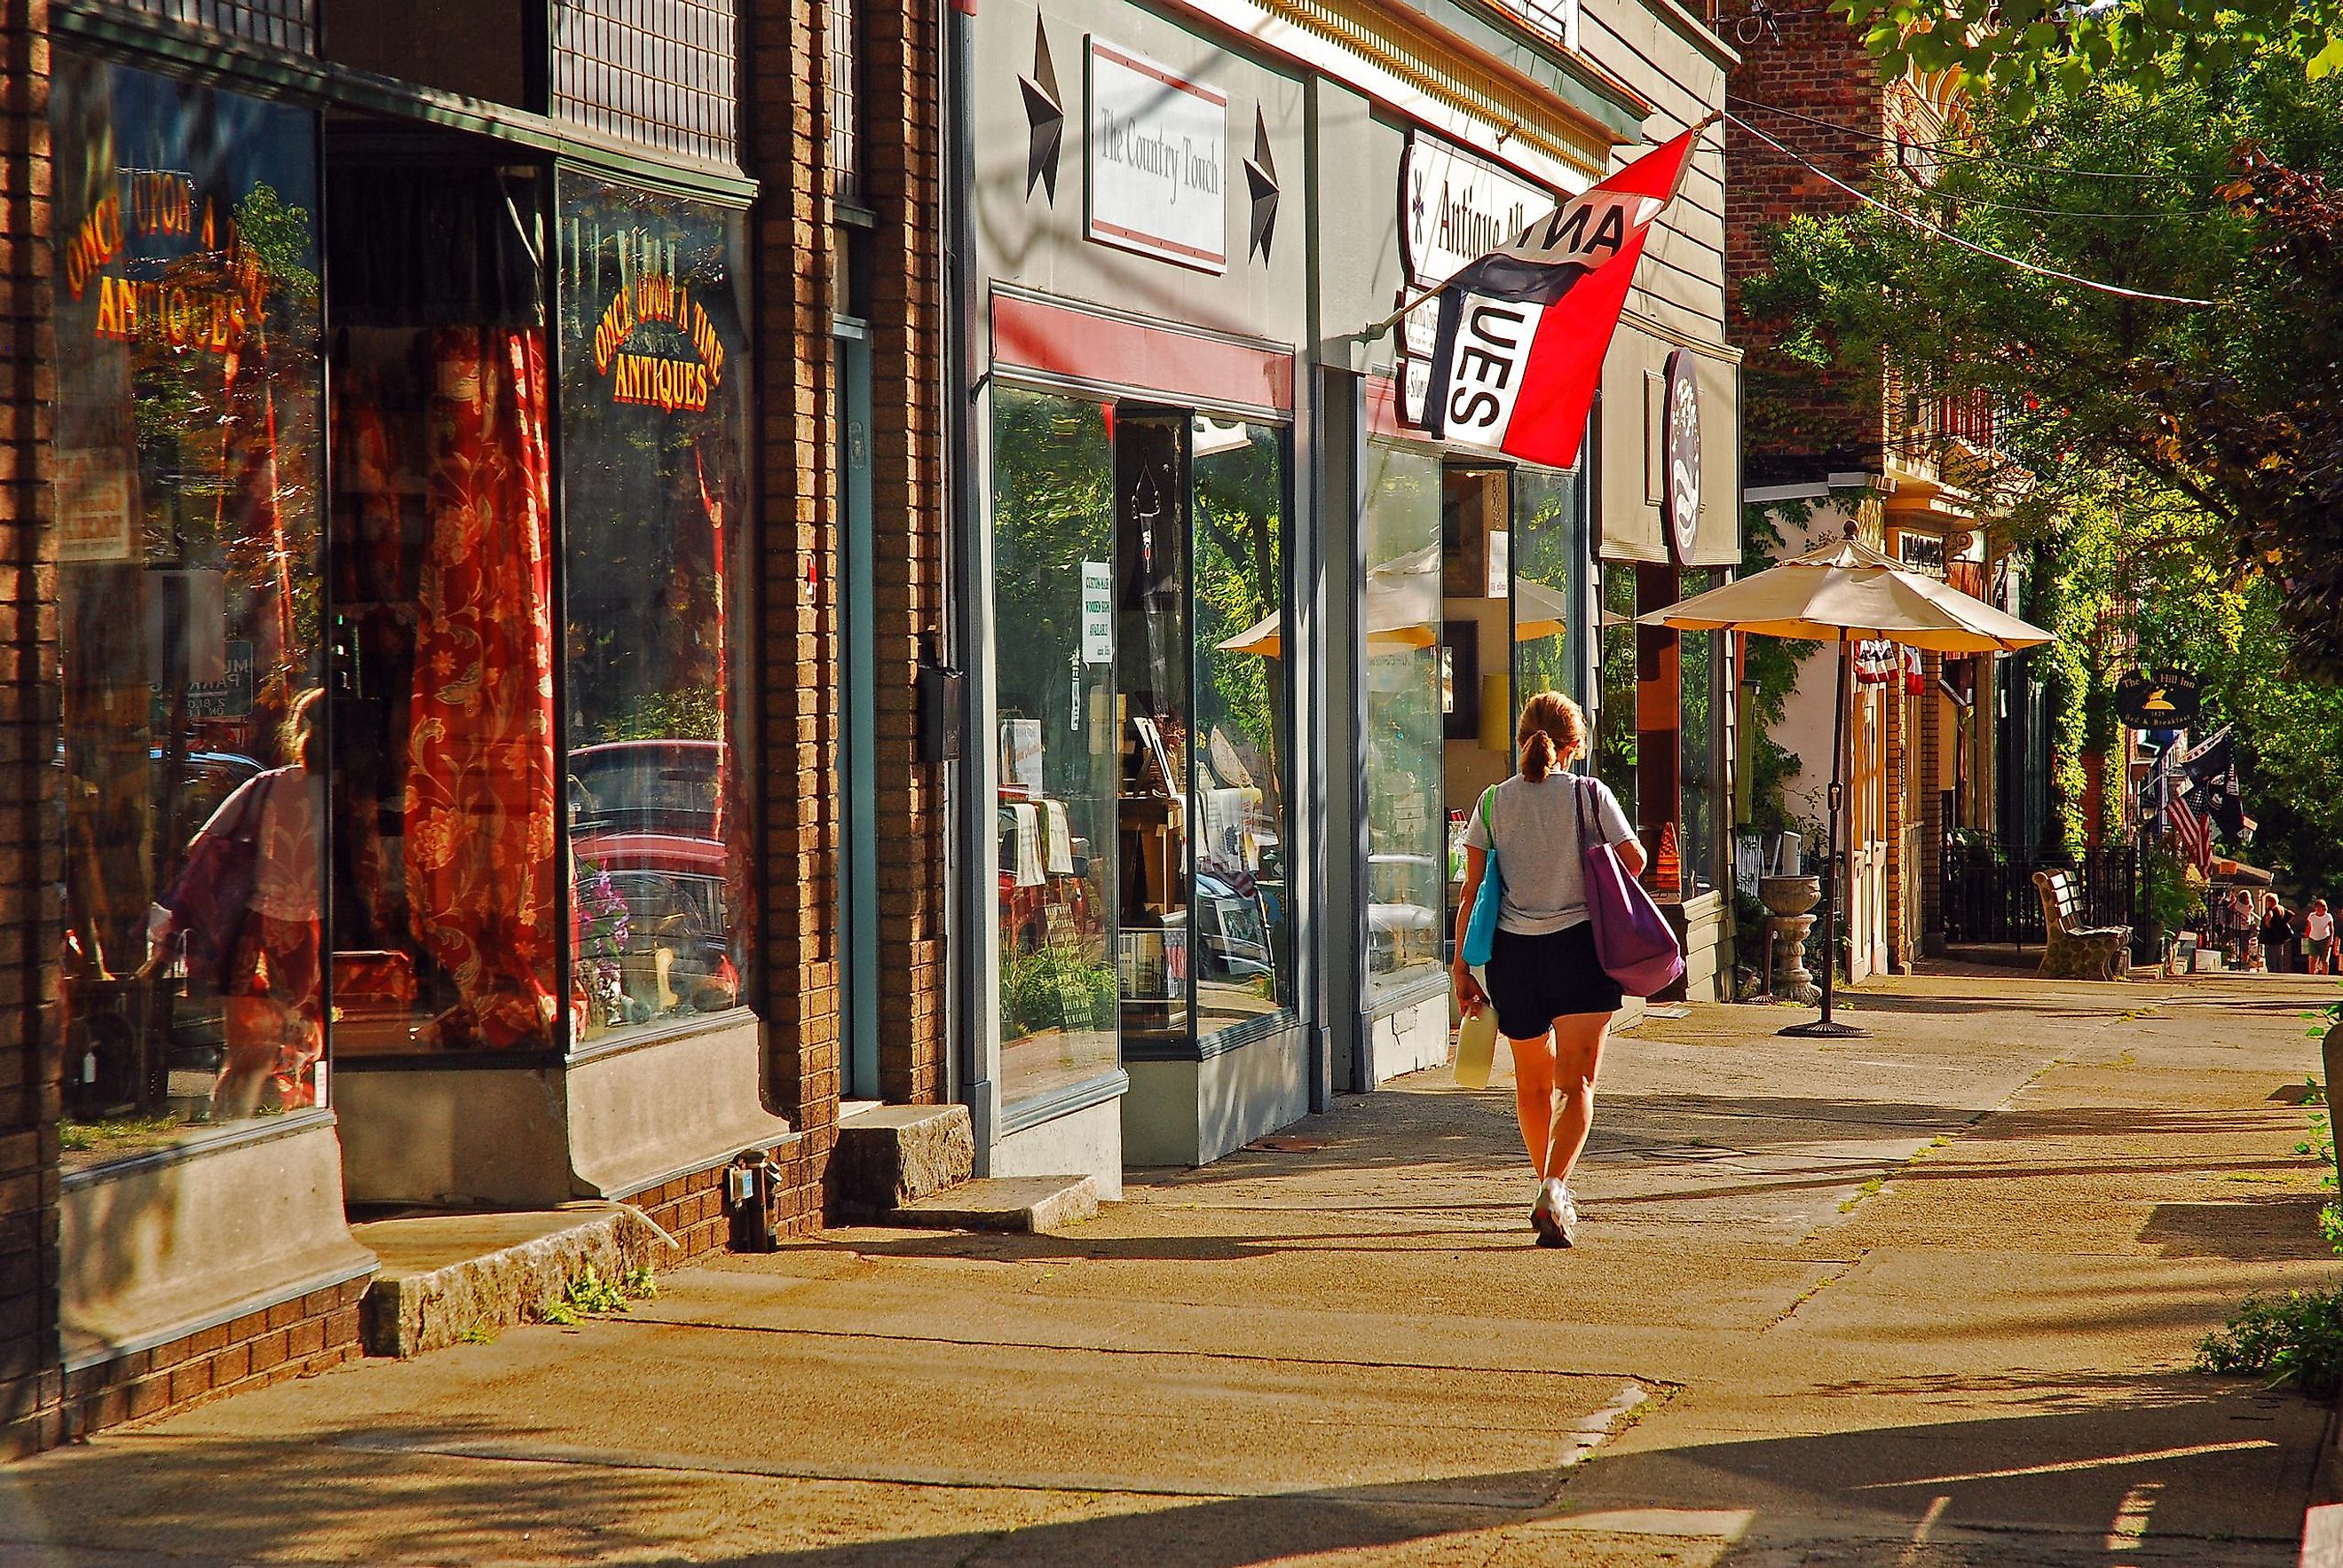 A young woman walks past independent stores and boutiques on a sunny day in Cold Spring, New York